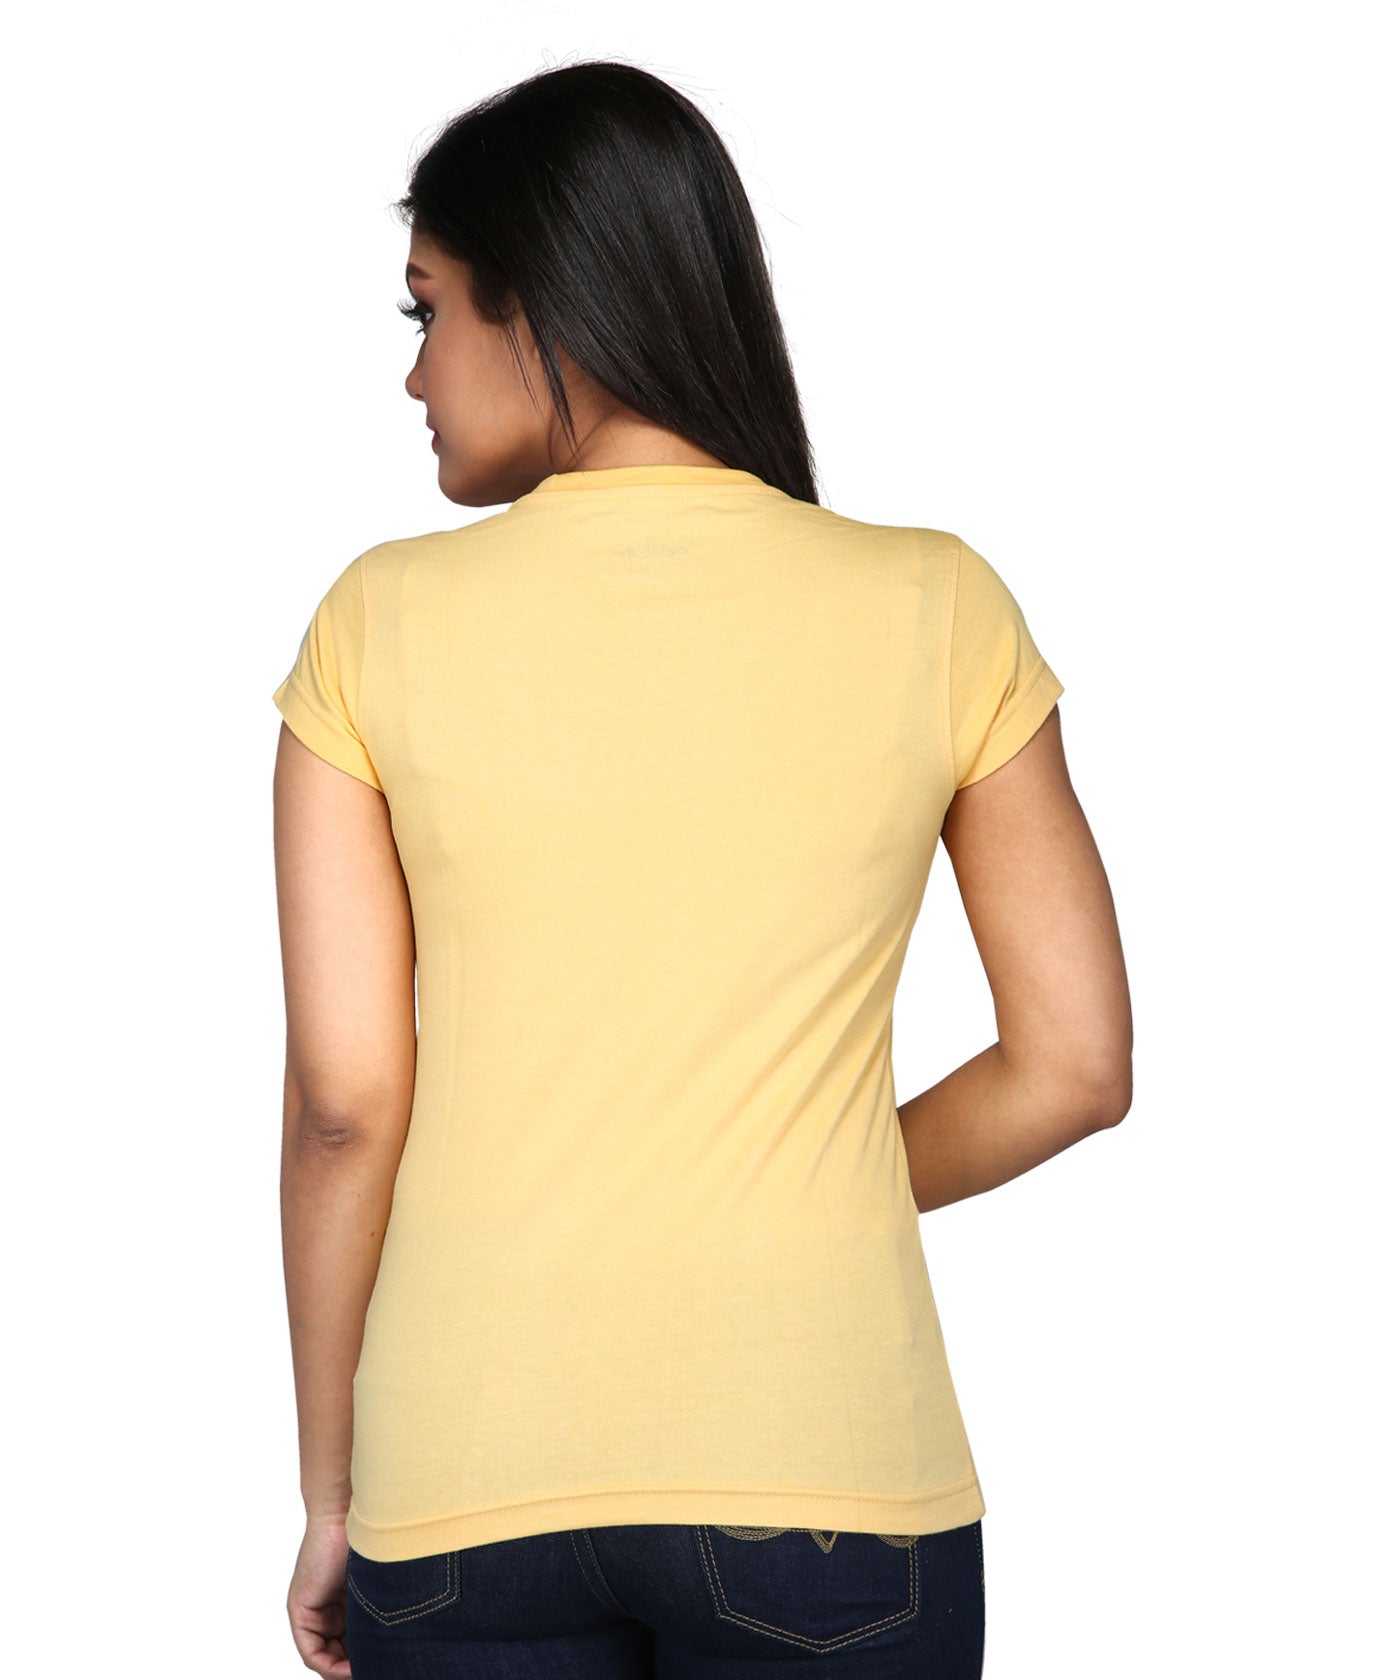 Triangle - Block Print Tees for Women - Golden Yellow